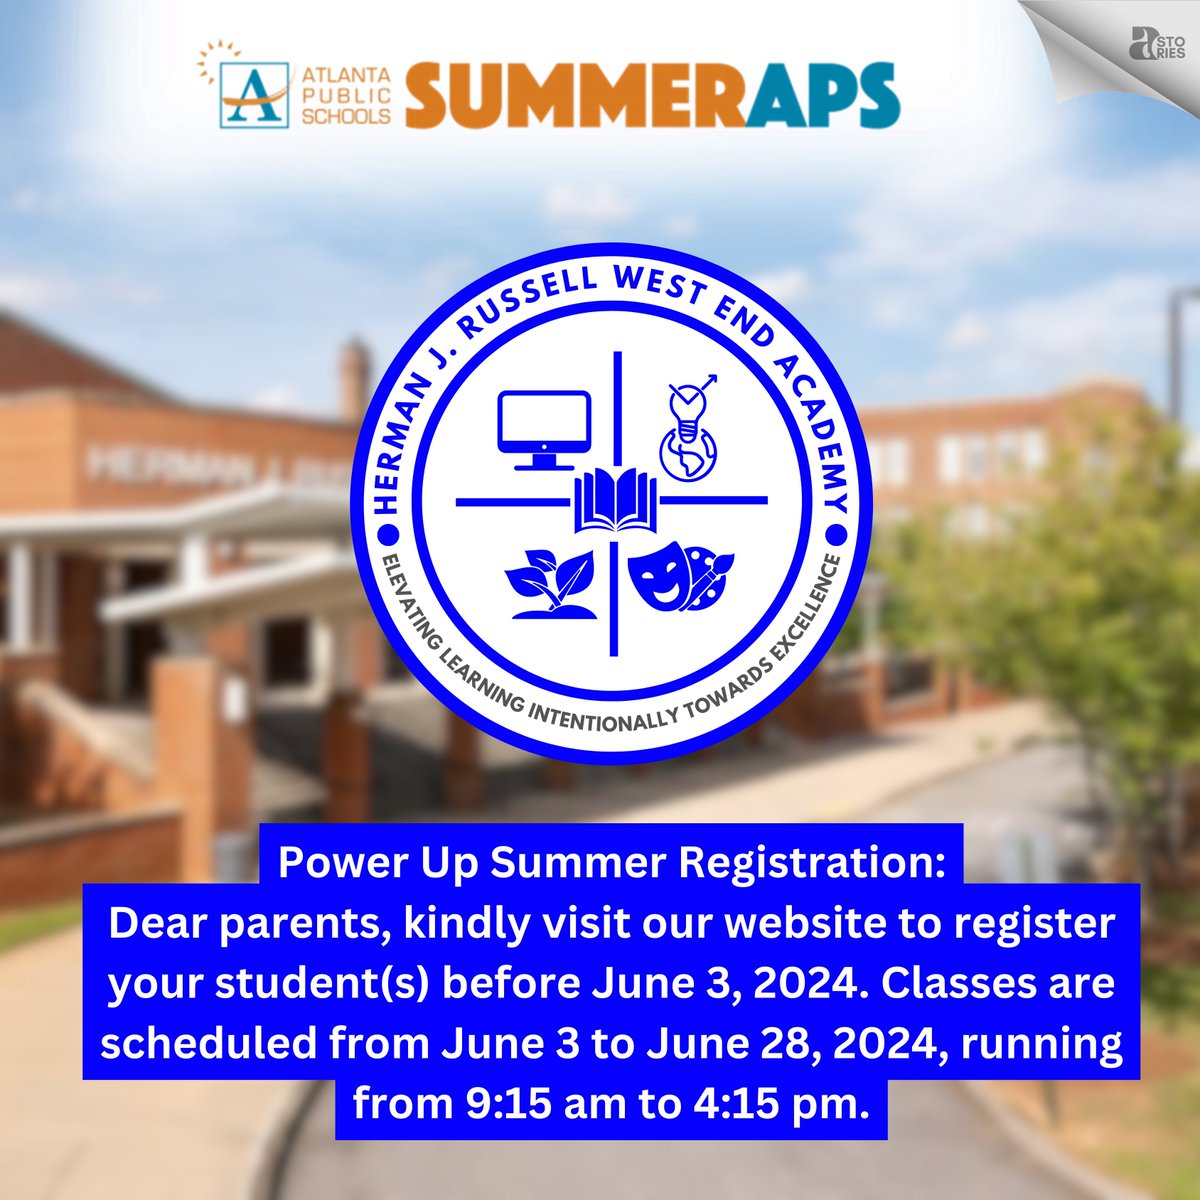 Power Up Summer Registration: Dear parents, kindly visit our website to register your student(s) before June 3, 2024. Classes are scheduled from June 3 to June 28, 2024, running from 9:15 am to 4:15 pm. atlantapublicschools.us/hermanjrussell